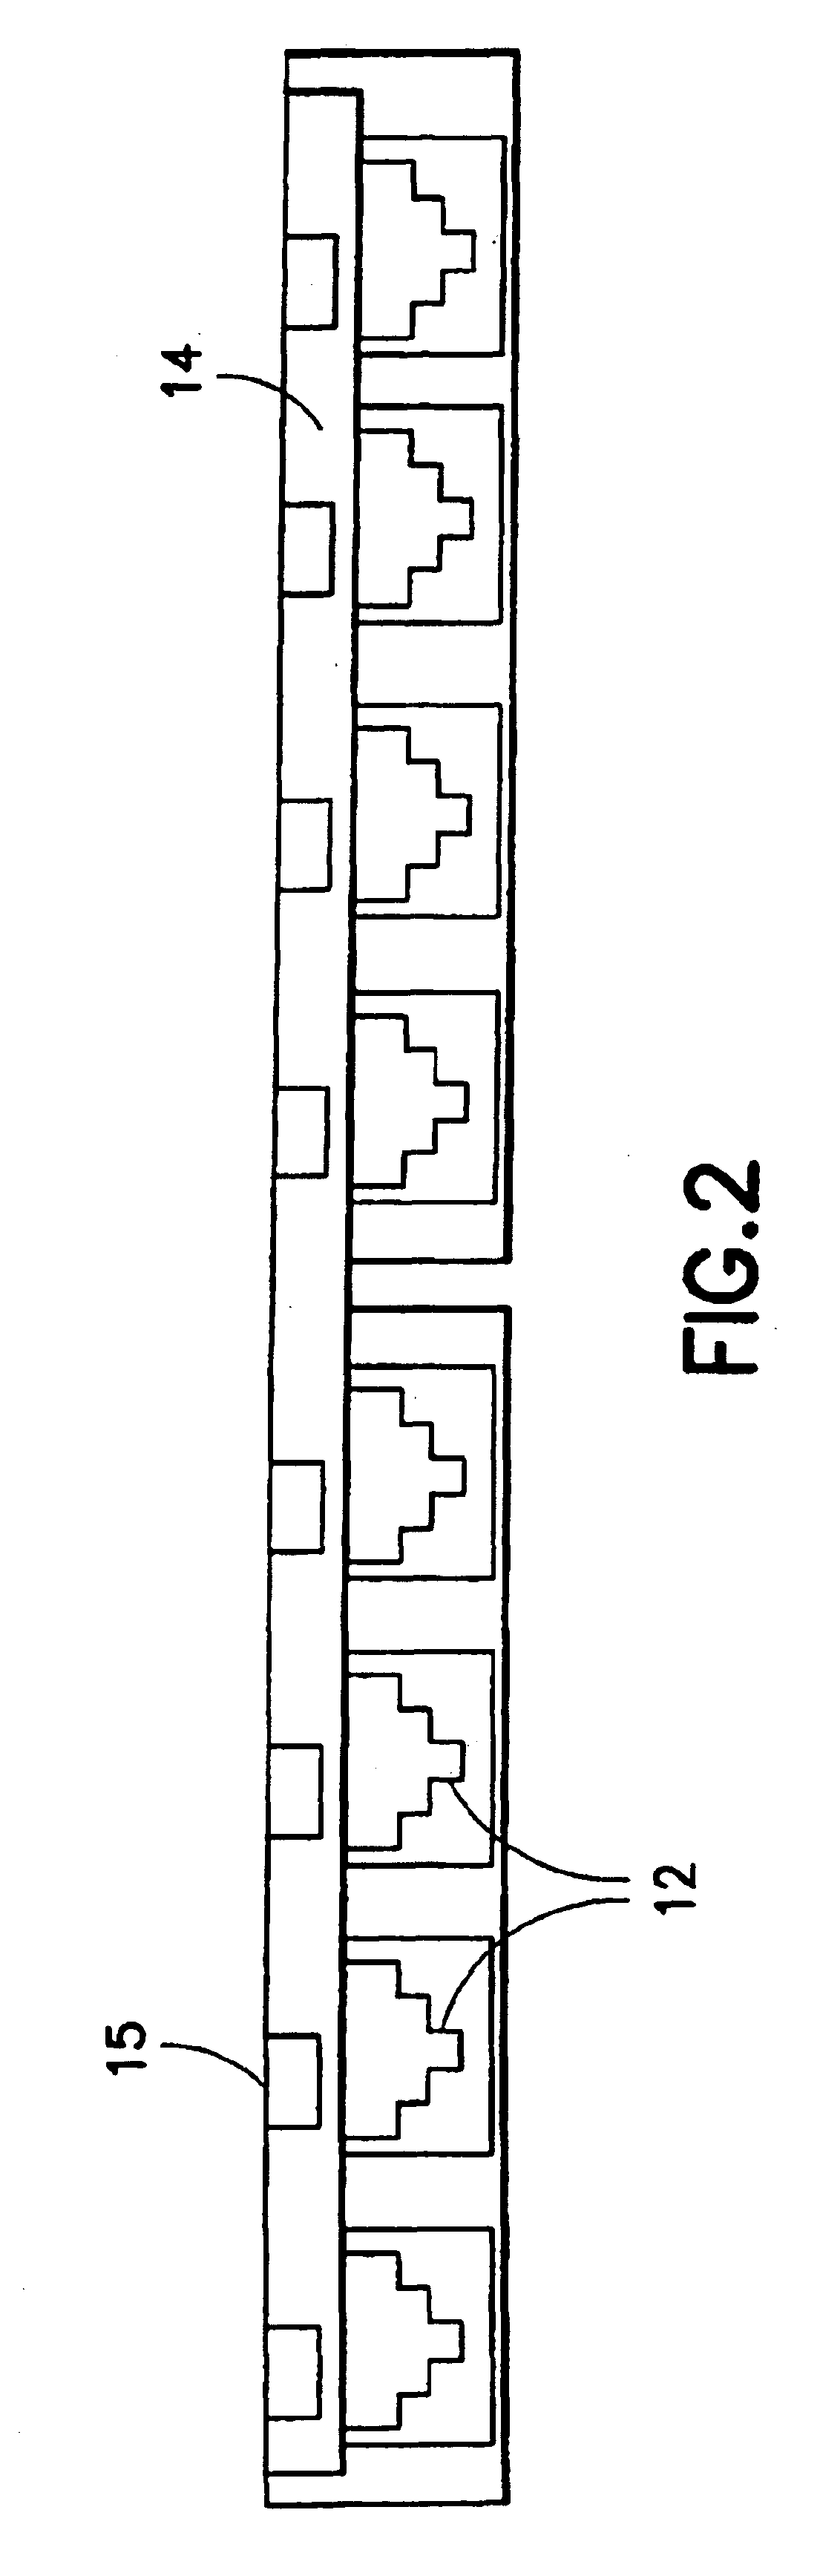 System for monitoring connection pattern of data ports